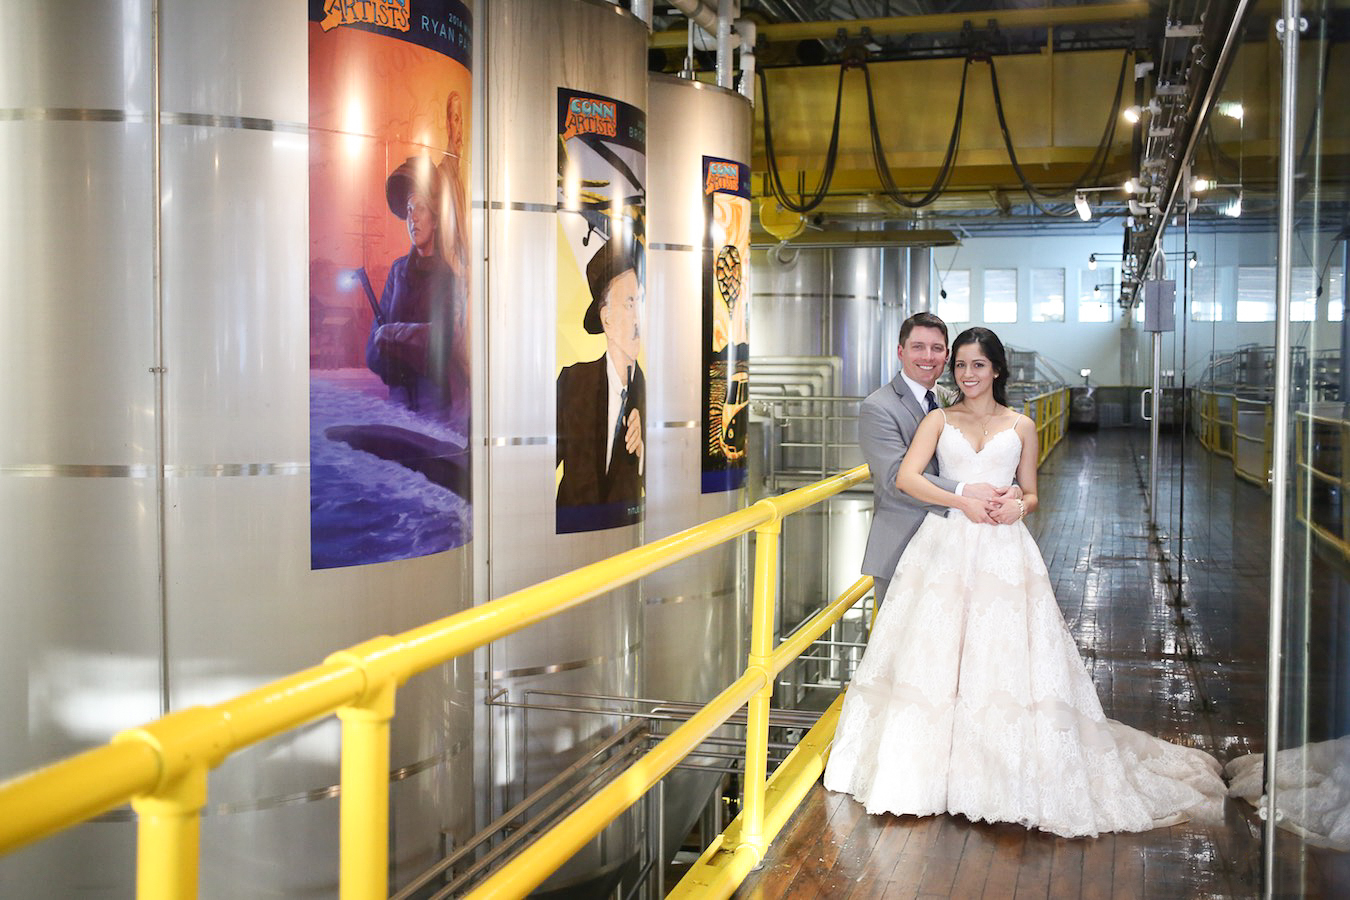 Two Roads Brewery Wedding